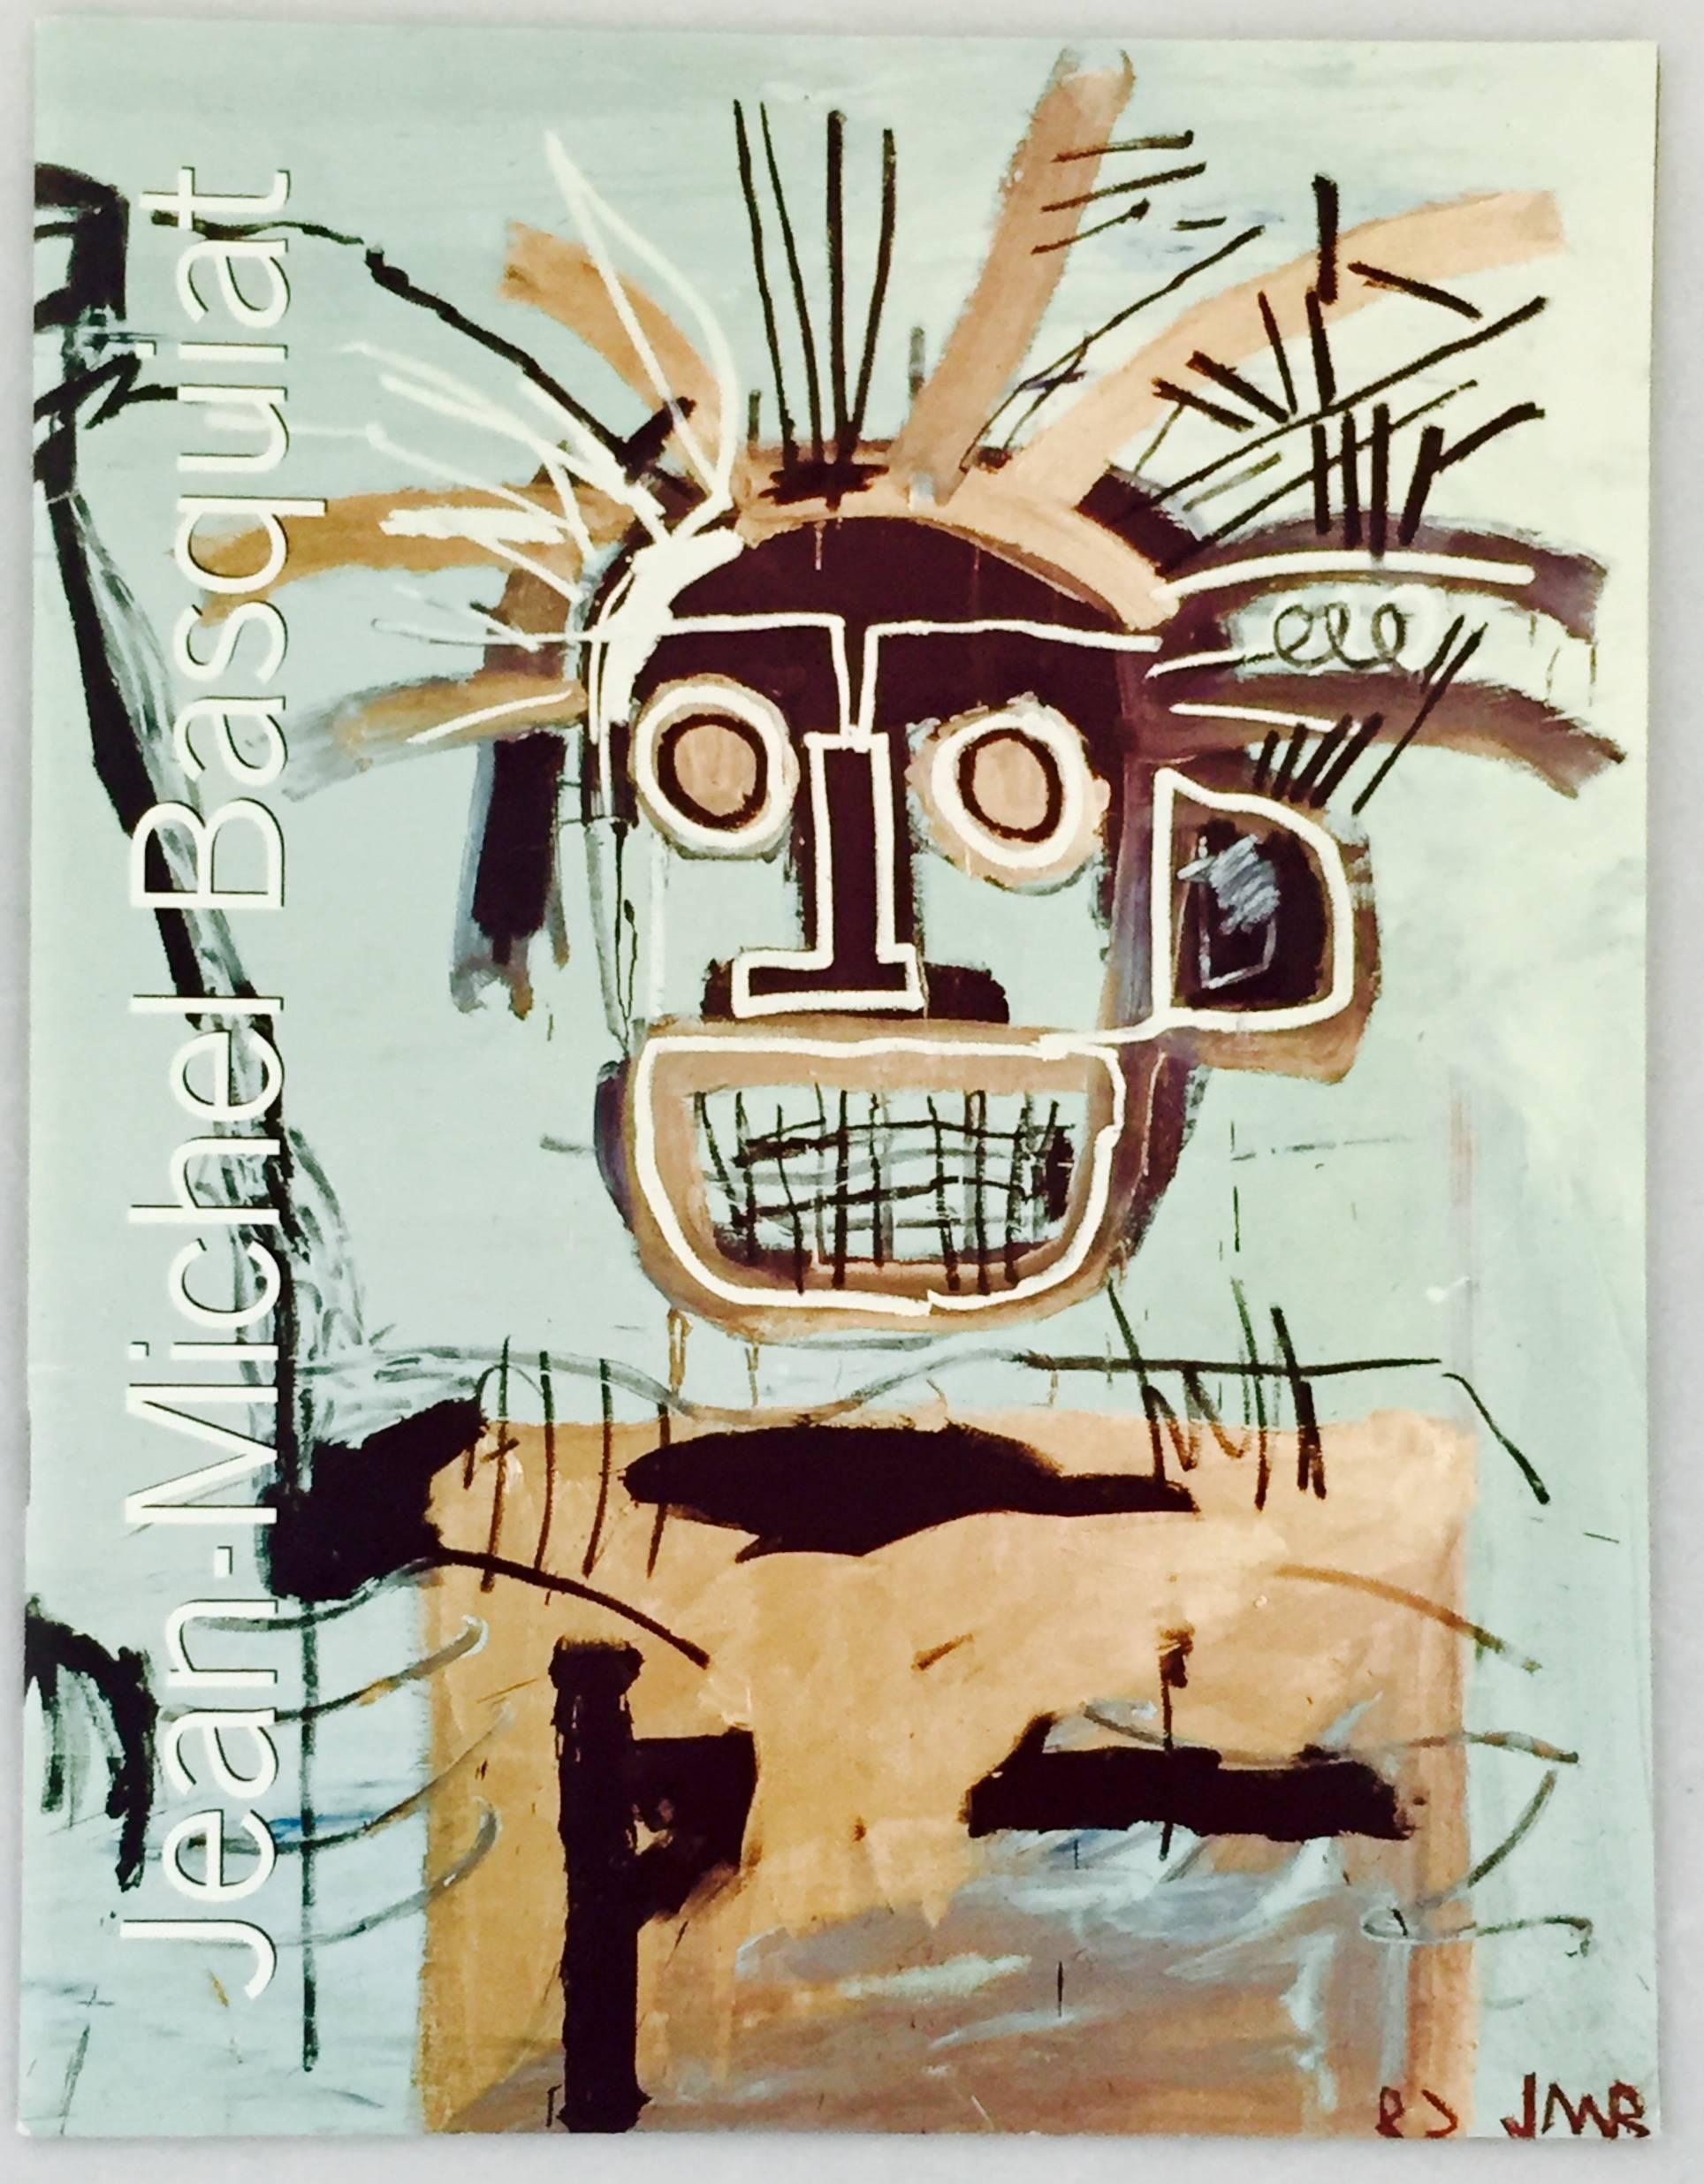 Basquiat at Serpentine Gallery, London (Exhibition Catalogue) - Print by after Jean-Michel Basquiat